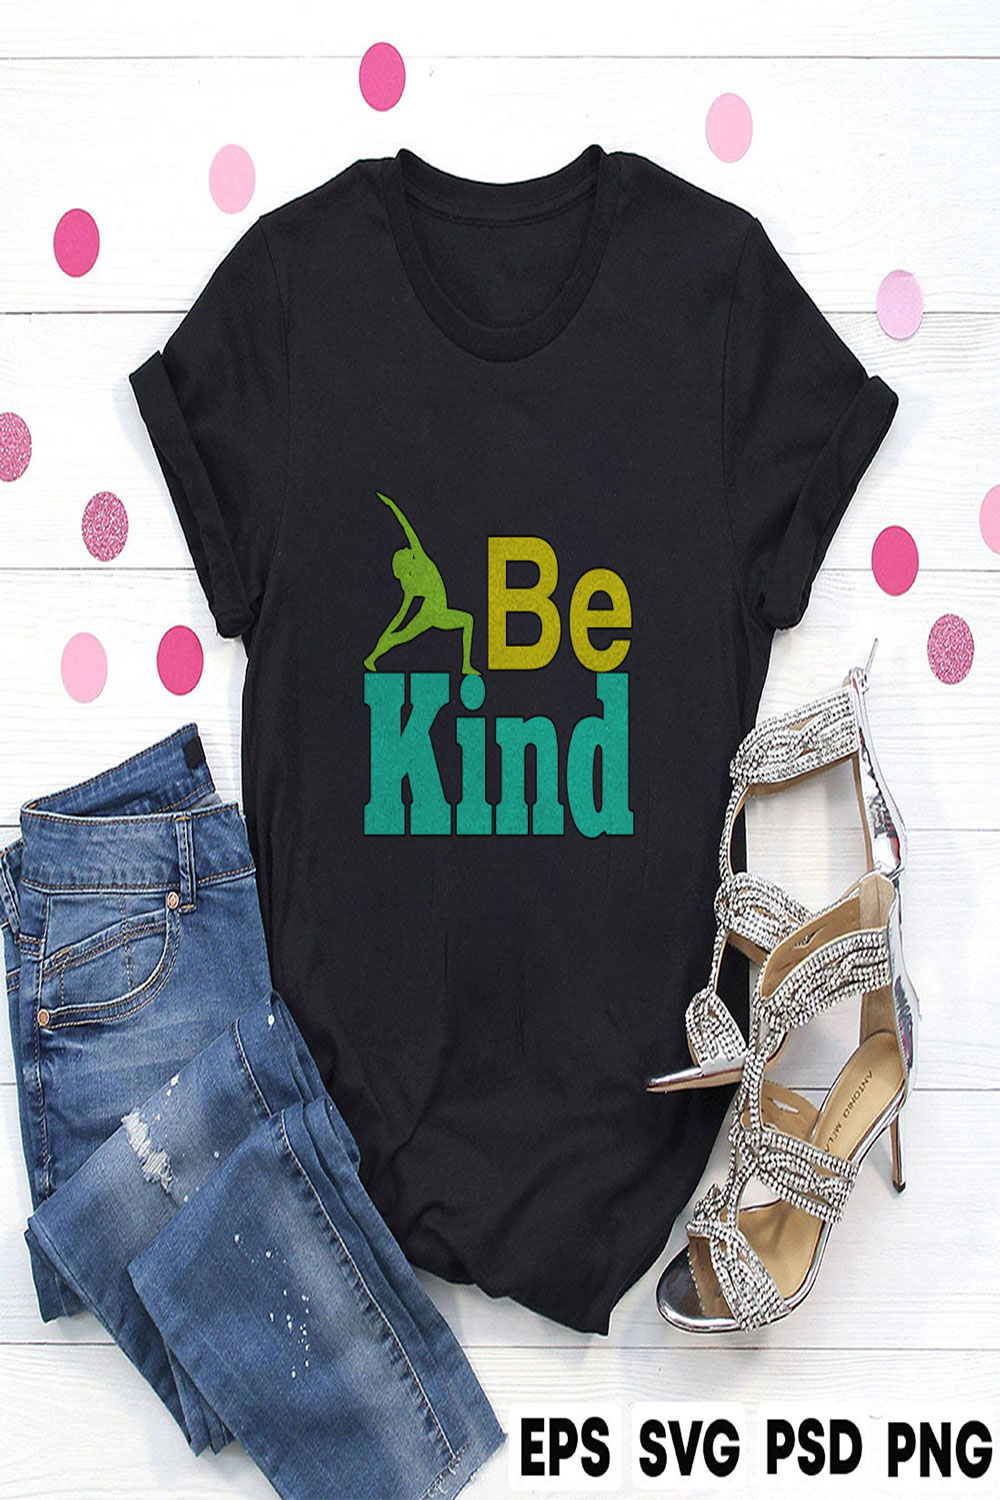 Be kind pinterest preview image.